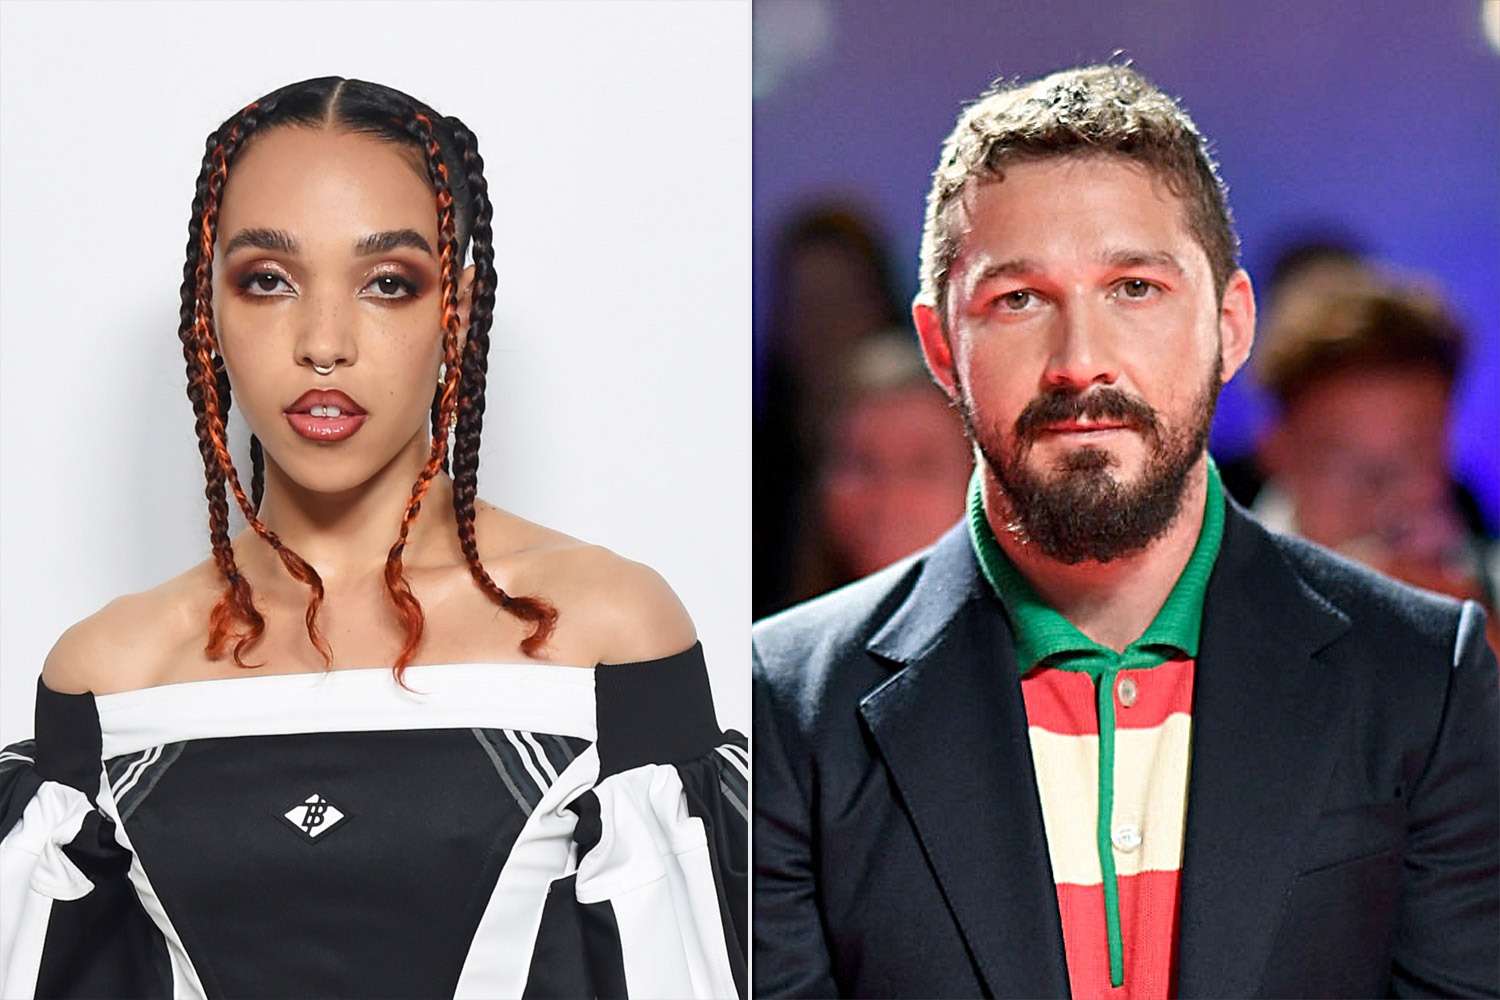 FKA Twigs – Victim Of Alleged Violence? Is Shia LaBeouf Guilty?